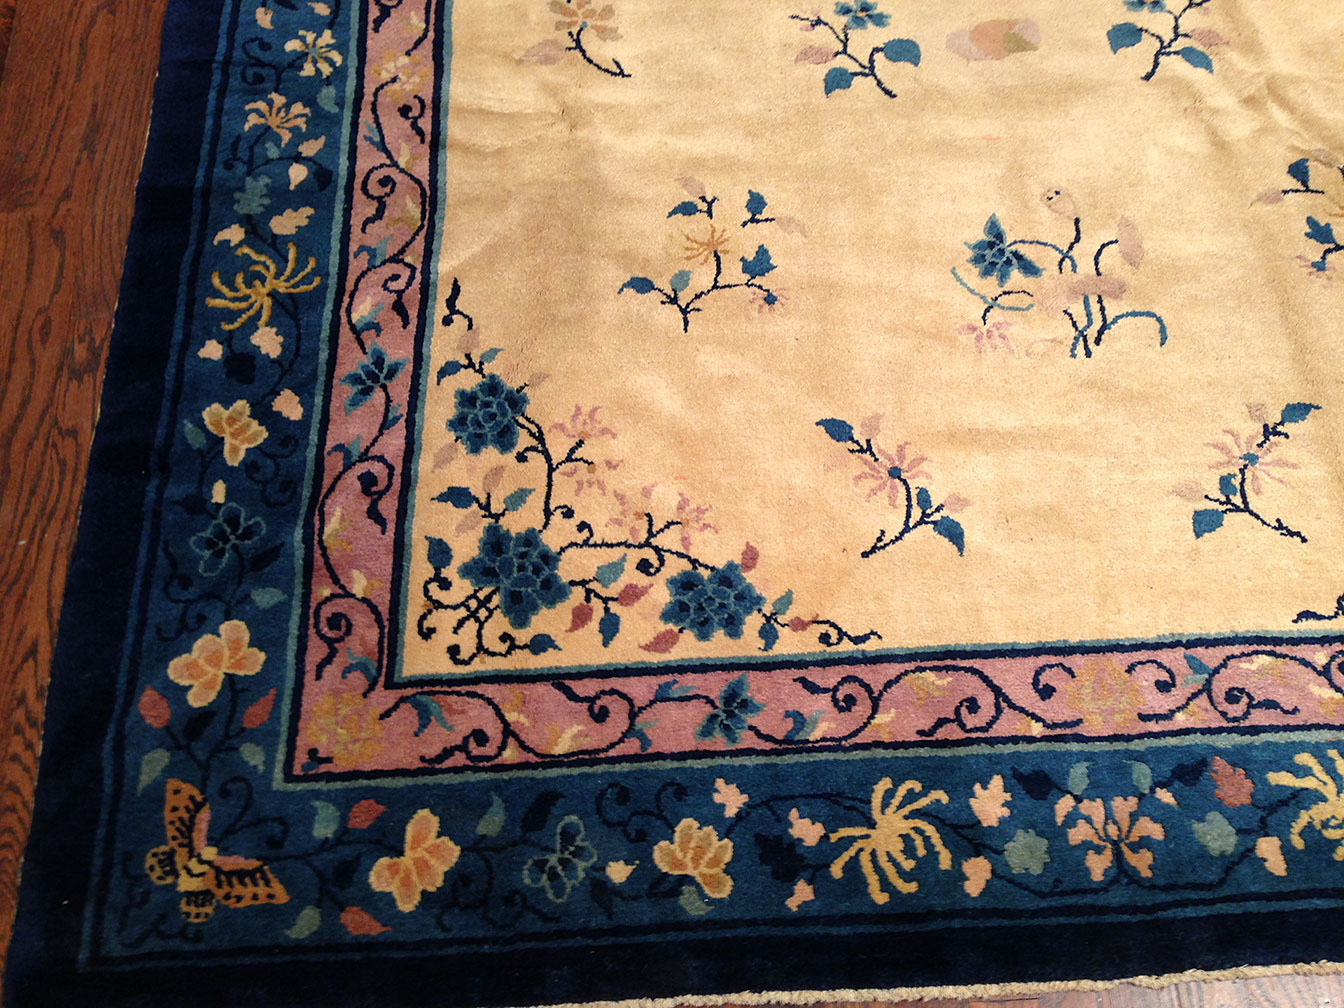 Antique chinese Rug - # 9505